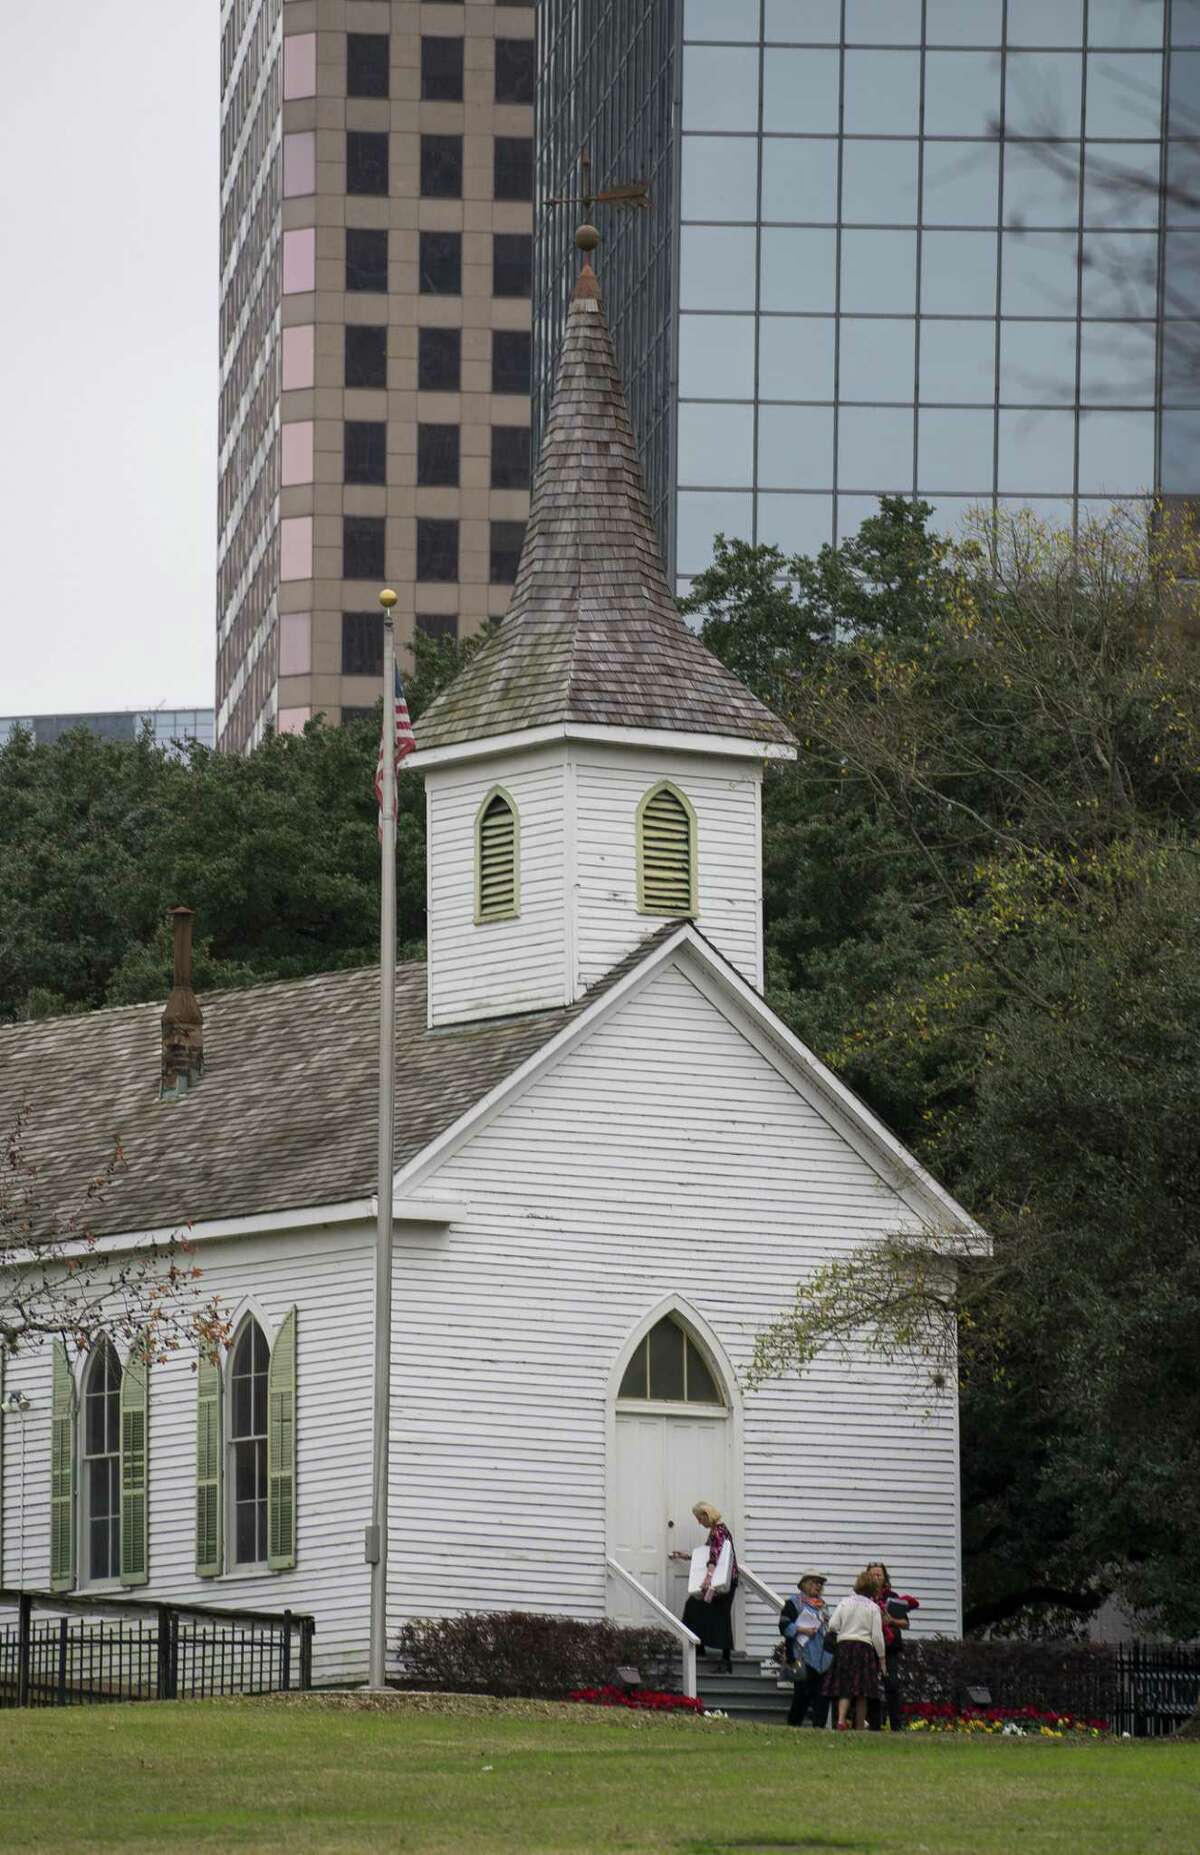 People exit the St. John Church building, originally built in 1891, and now standing in Sam Houston Park in downtown Houston where historic buildings are maintained by the Heritage Society.